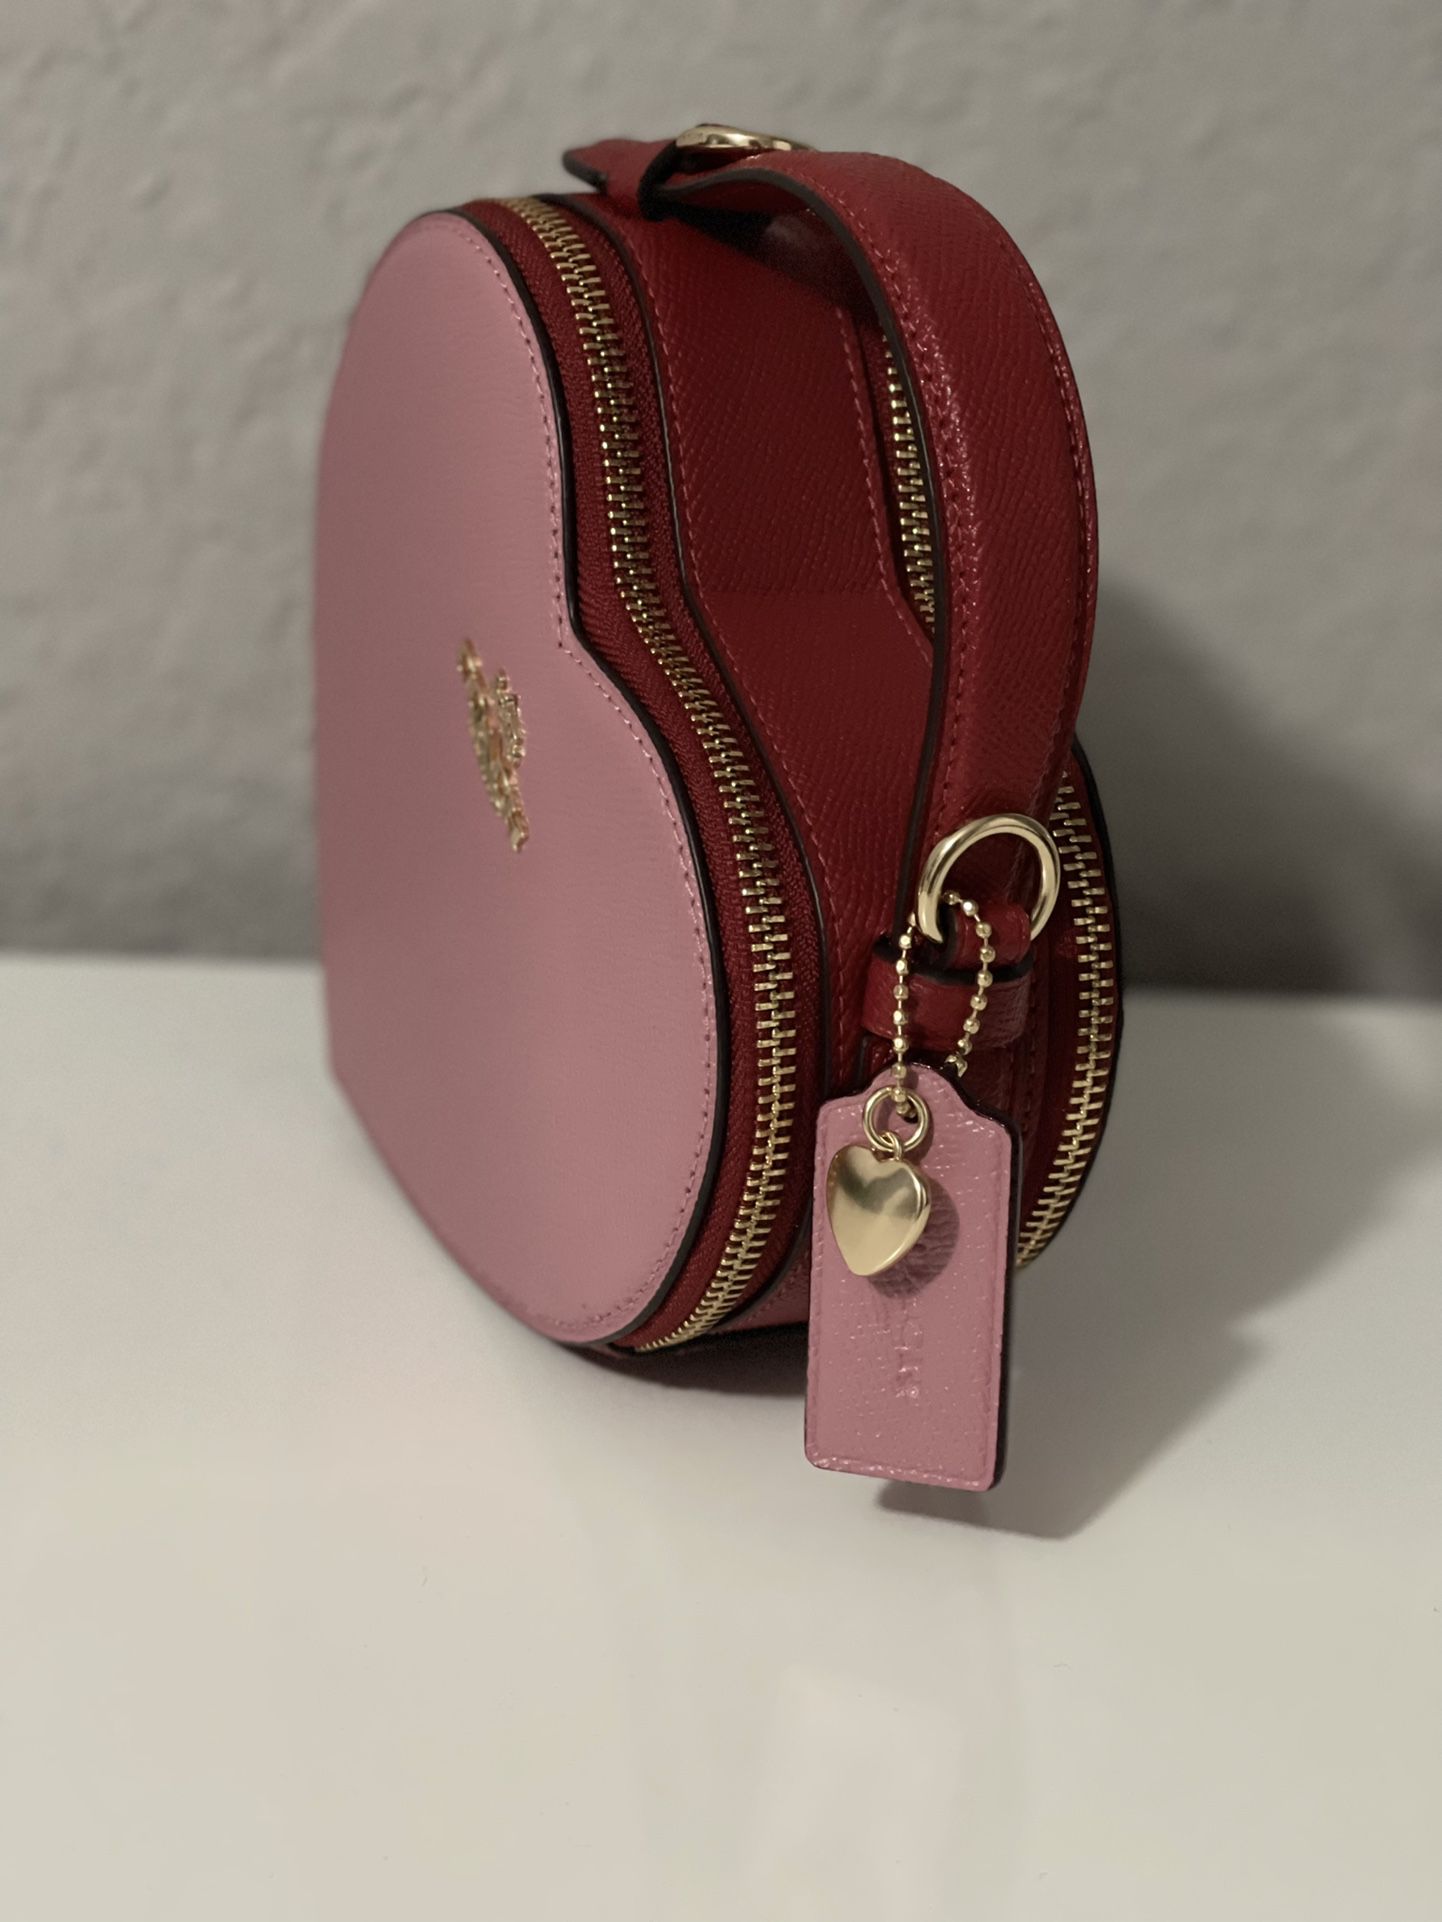 Coach Heart Crossbody Bag for Sale in Tolleson, AZ - OfferUp